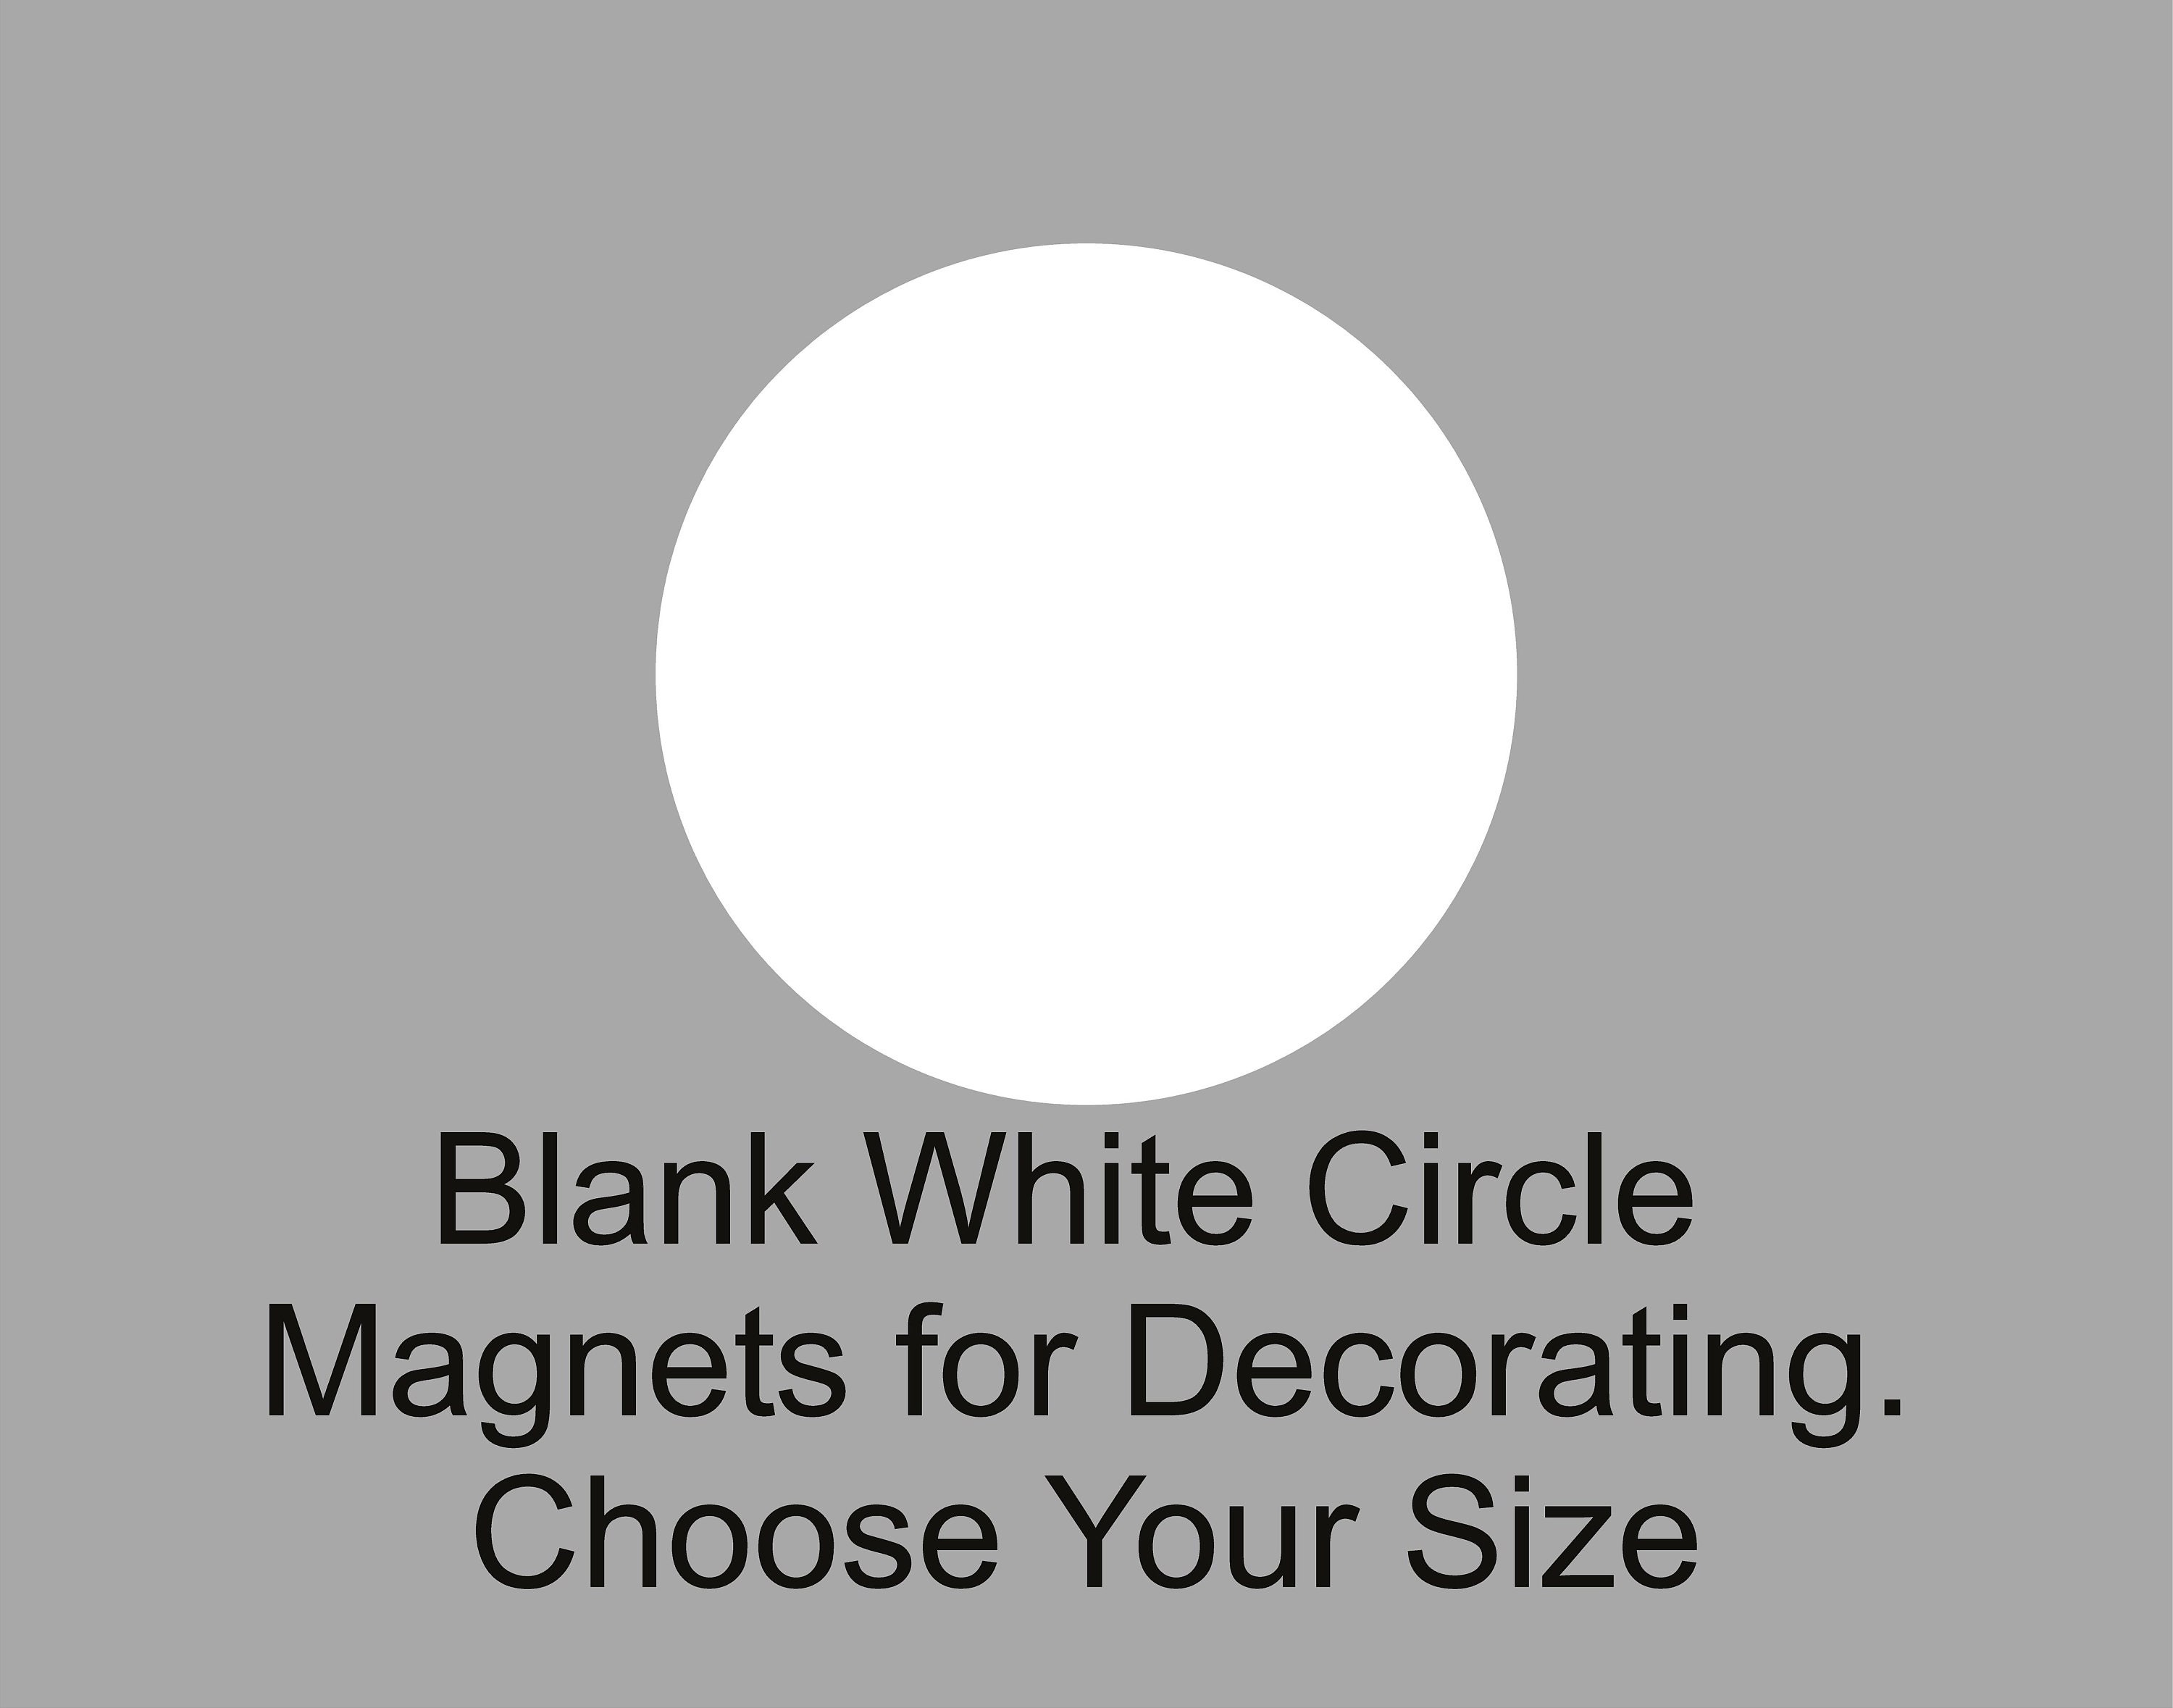 CRAZY STRONG Wooden Circle Magnets, Painted White Modern Style,  Refrigerator Magnets, Home or Office Magnetic Board Organizer, 1.5 Diameter  